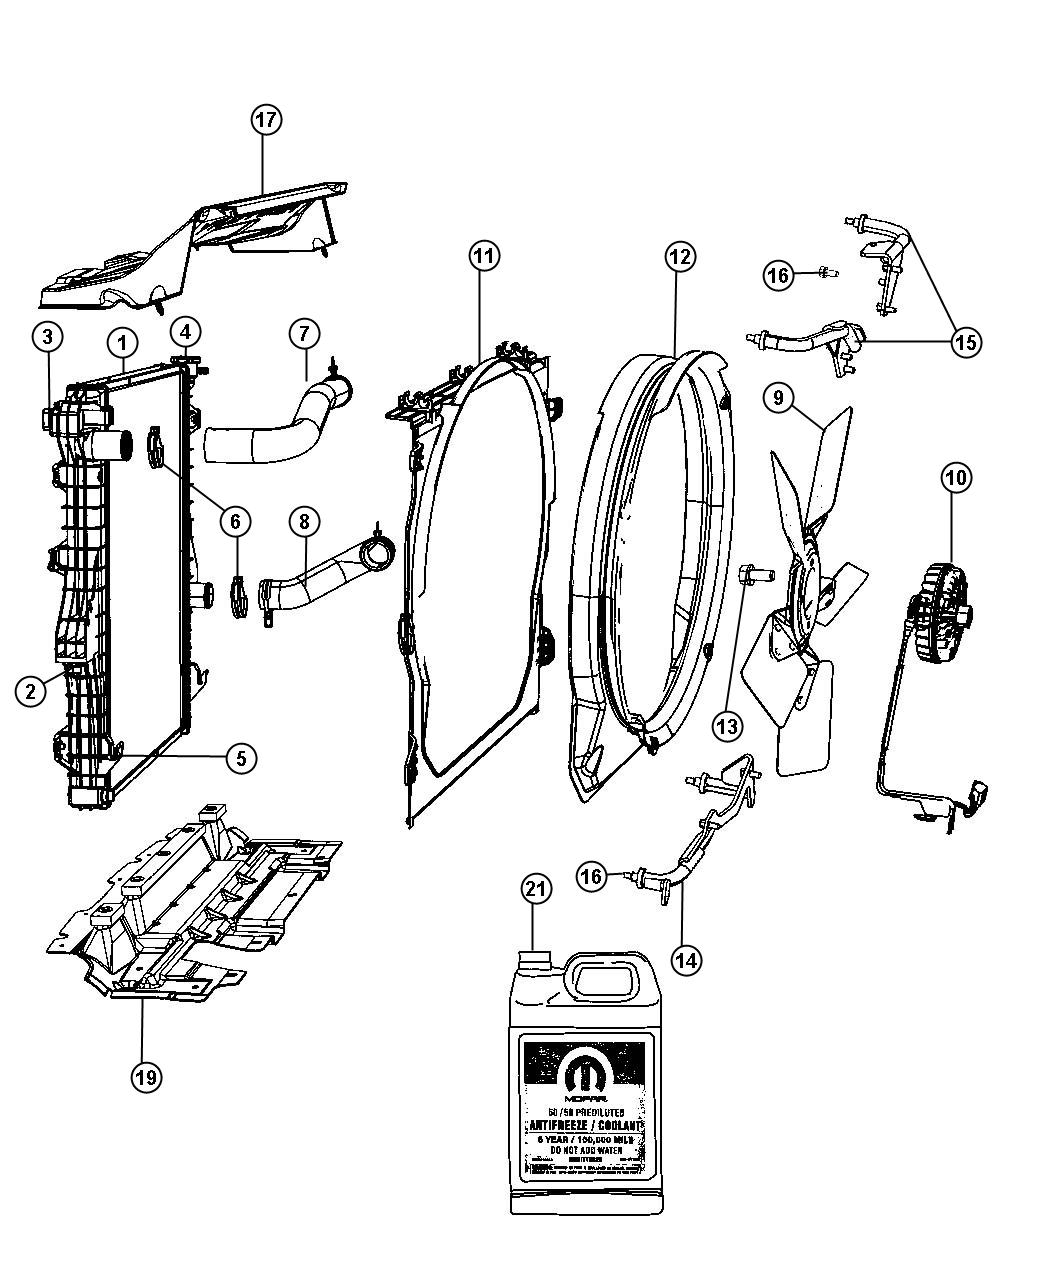 Diagram Radiator and Related Parts, 6.7L [6.7L I6 CUMMINS TURBO DIESEL ENGINE]. for your Ram